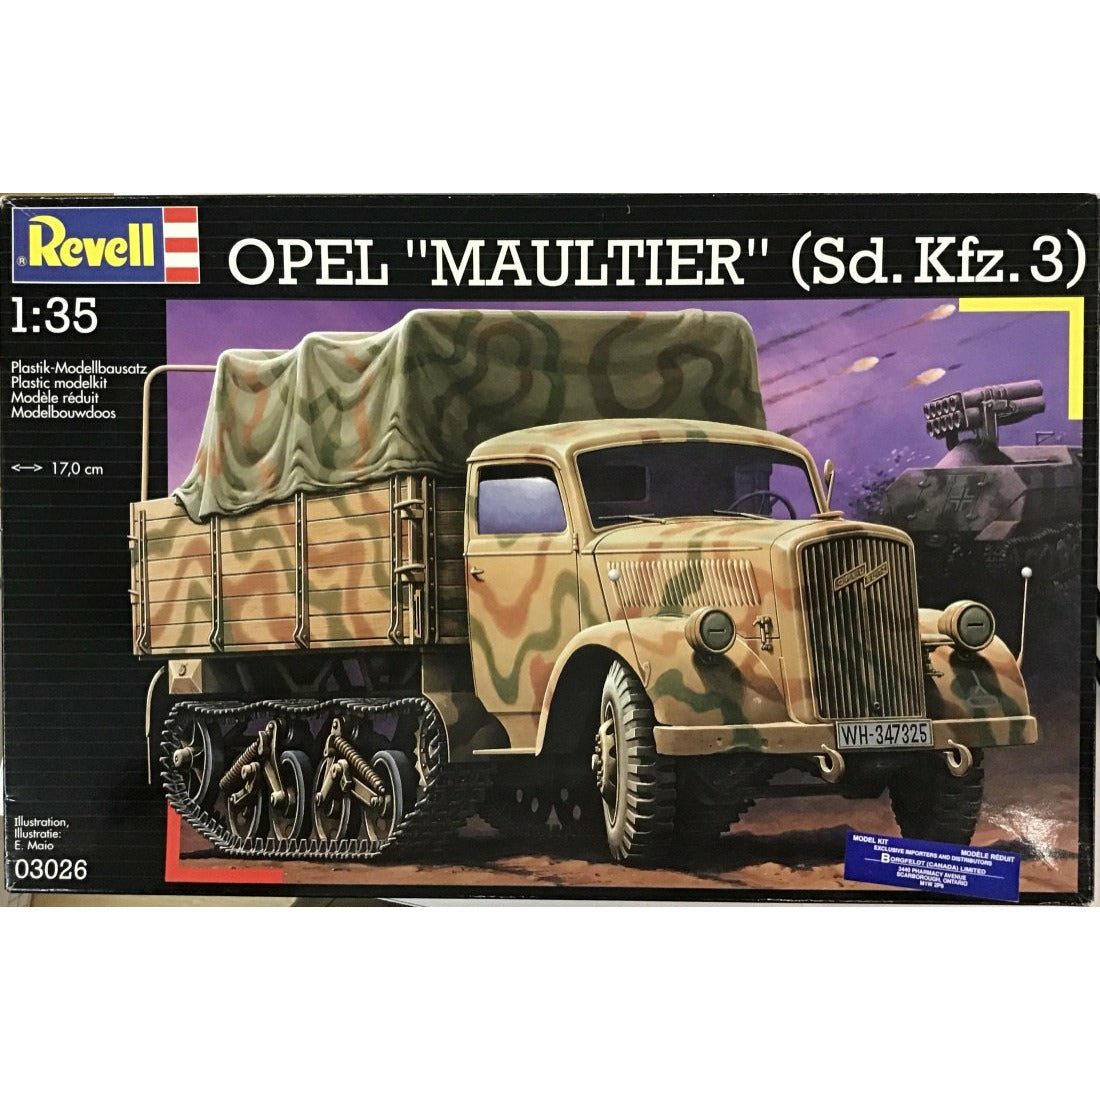 Opel "Mailtier" (Sd/ Kfz.3) (PRE-OWNED) 1/35 Revell